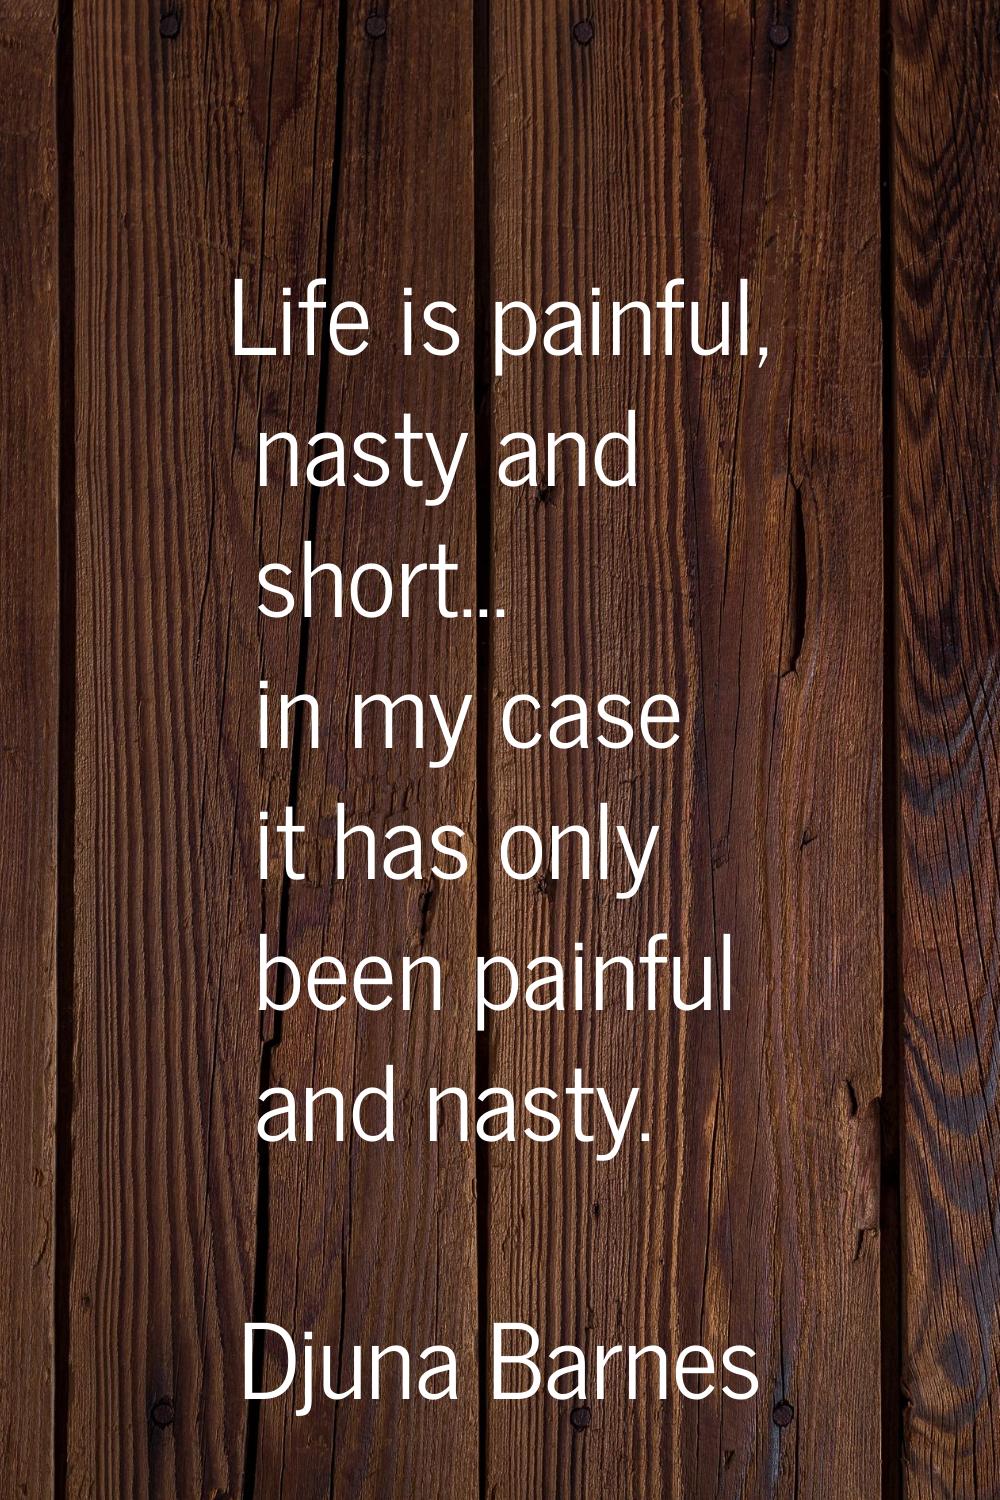 Life is painful, nasty and short... in my case it has only been painful and nasty.